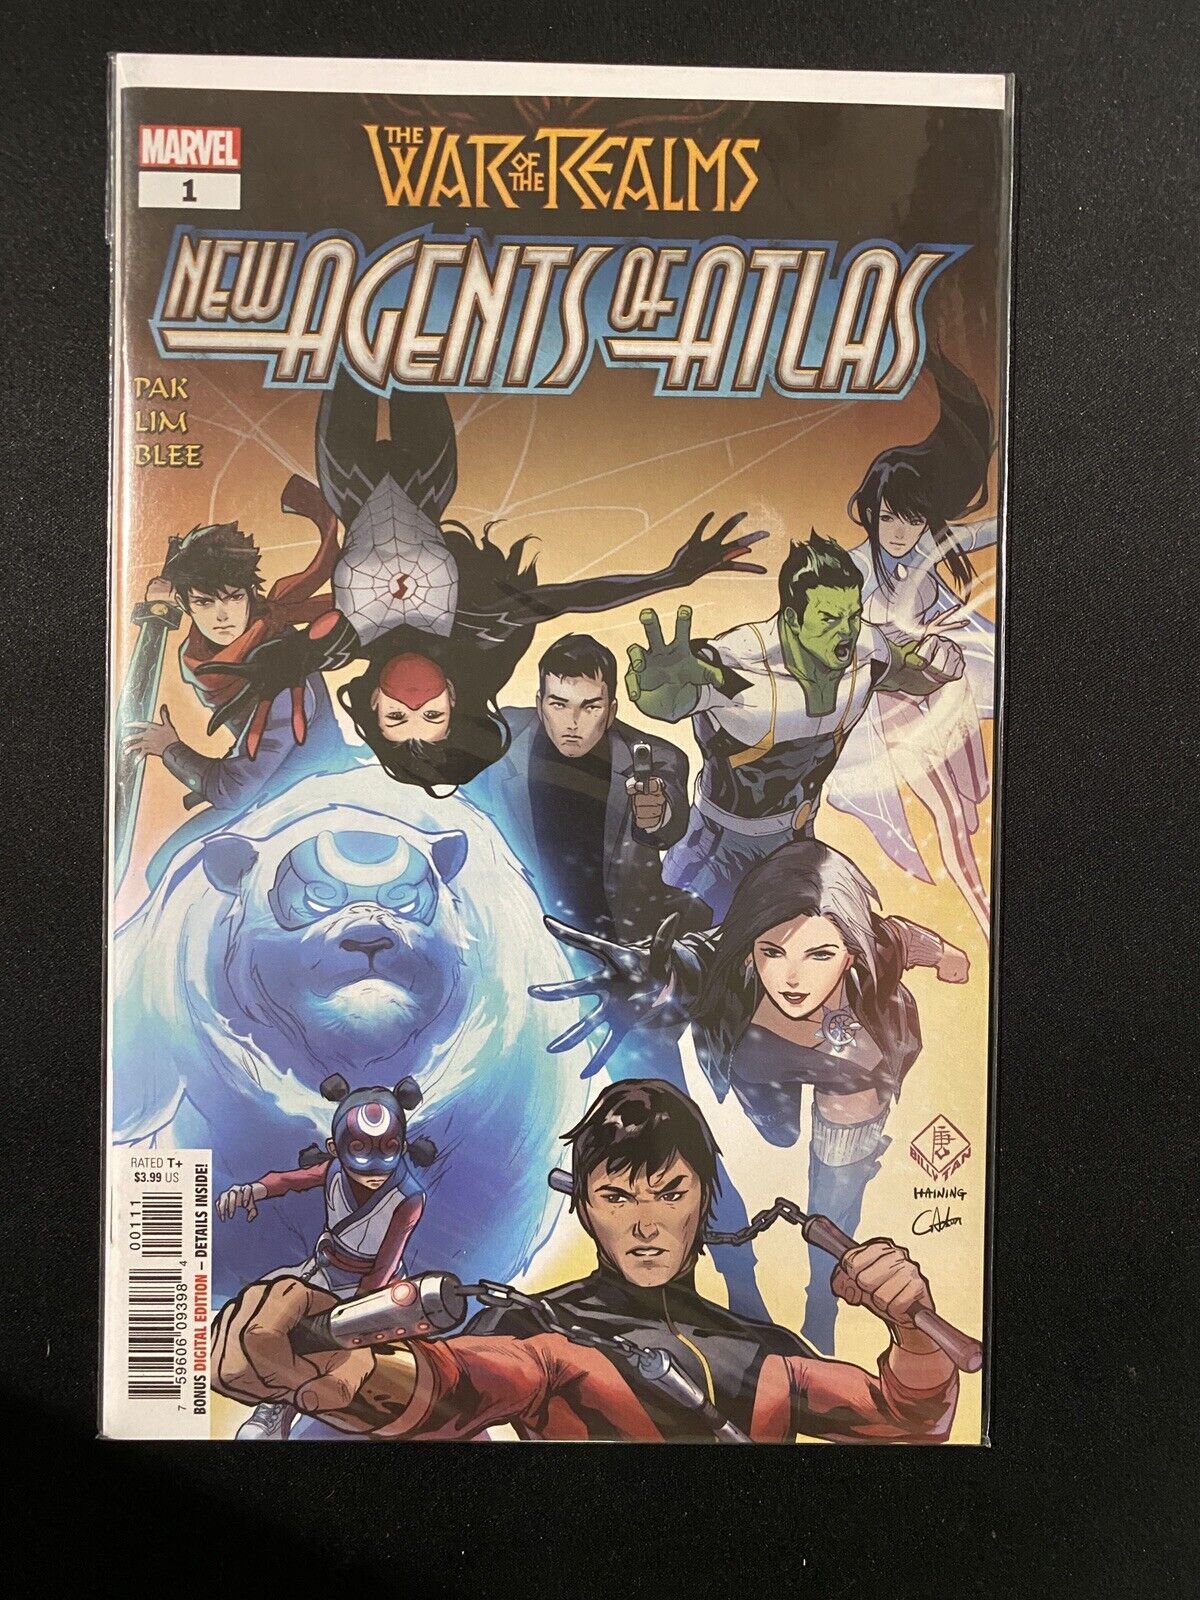 WAR OF THE REALMS NEW AGENTS OF ATLAS #1 (MARVEL 2019) 1ST LUNA SNOW, WAVE, AERO